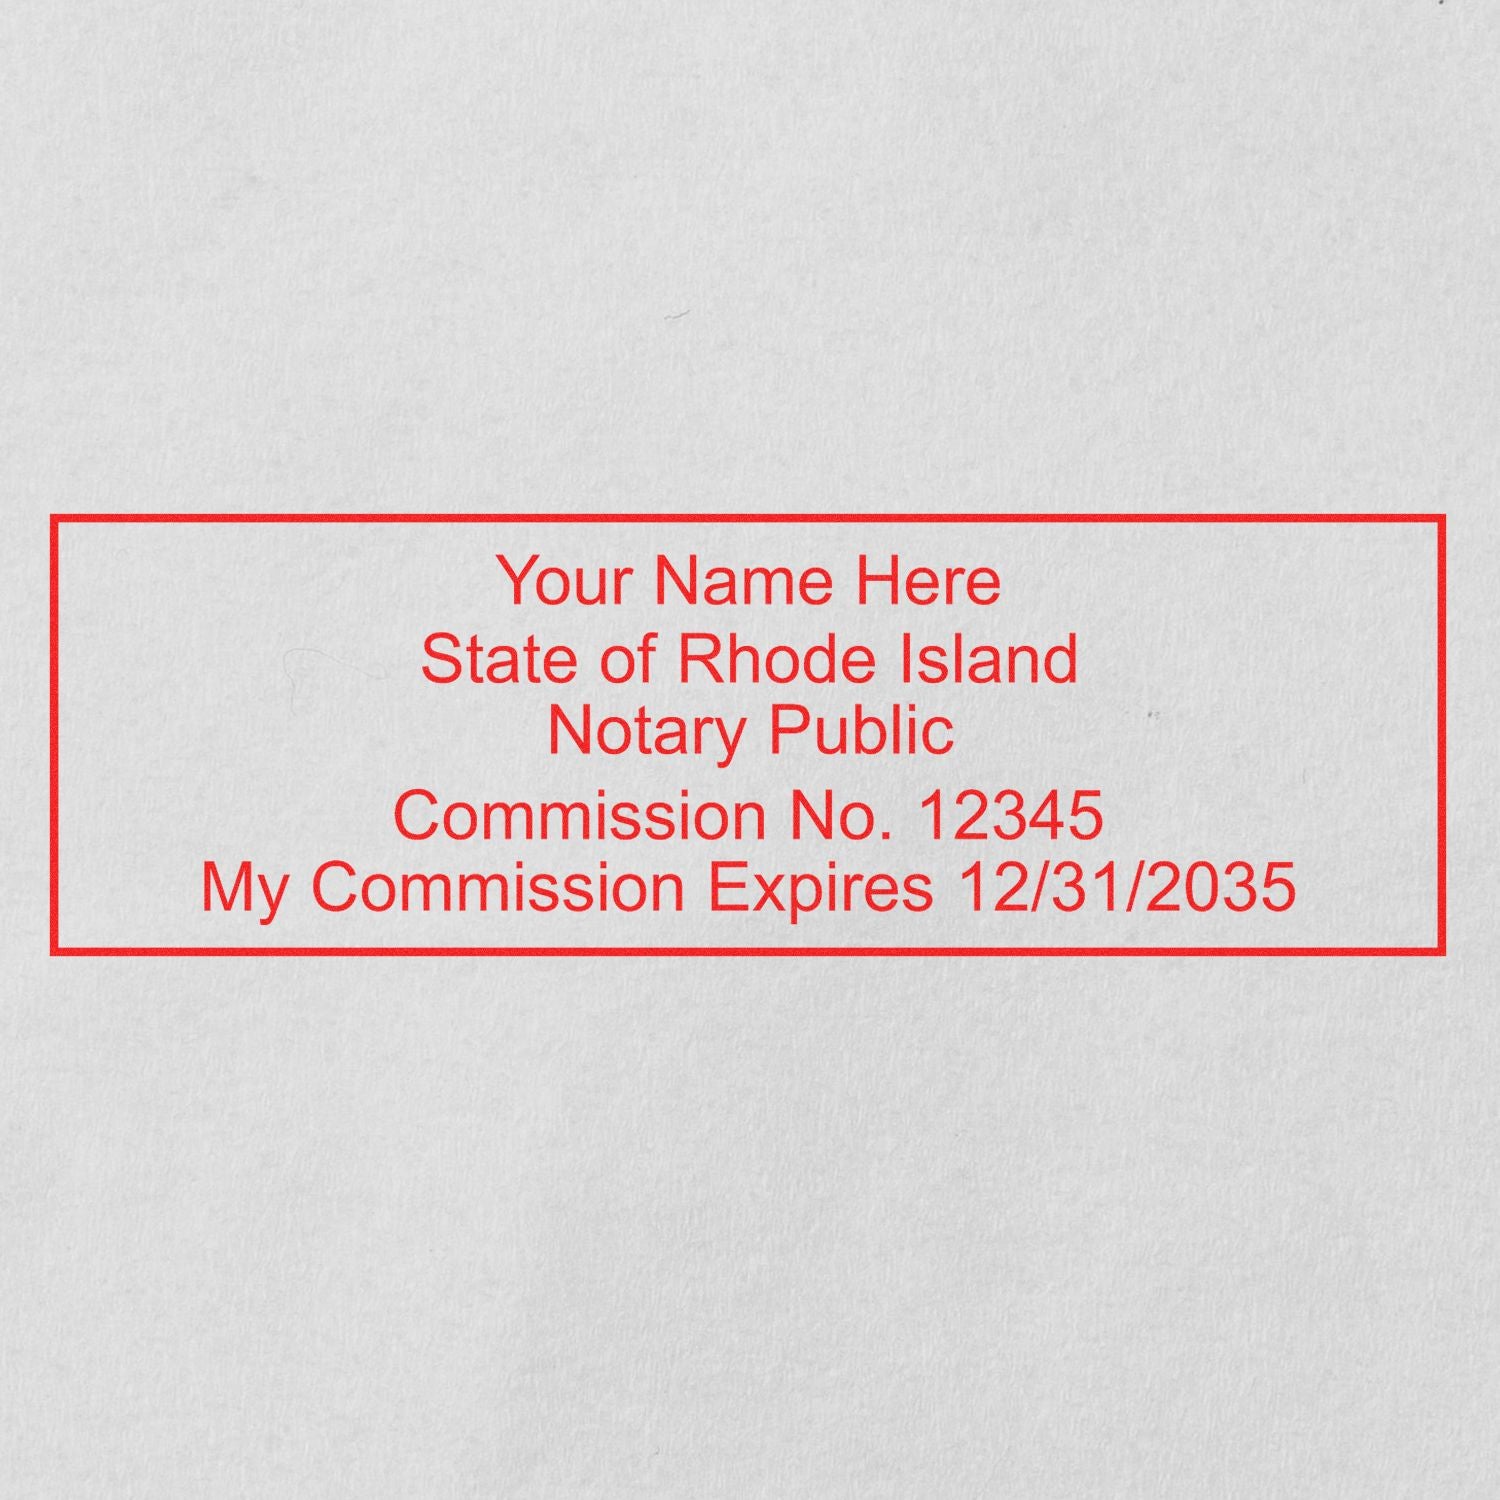 The main image for the PSI Rhode Island Notary Stamp depicting a sample of the imprint and electronic files